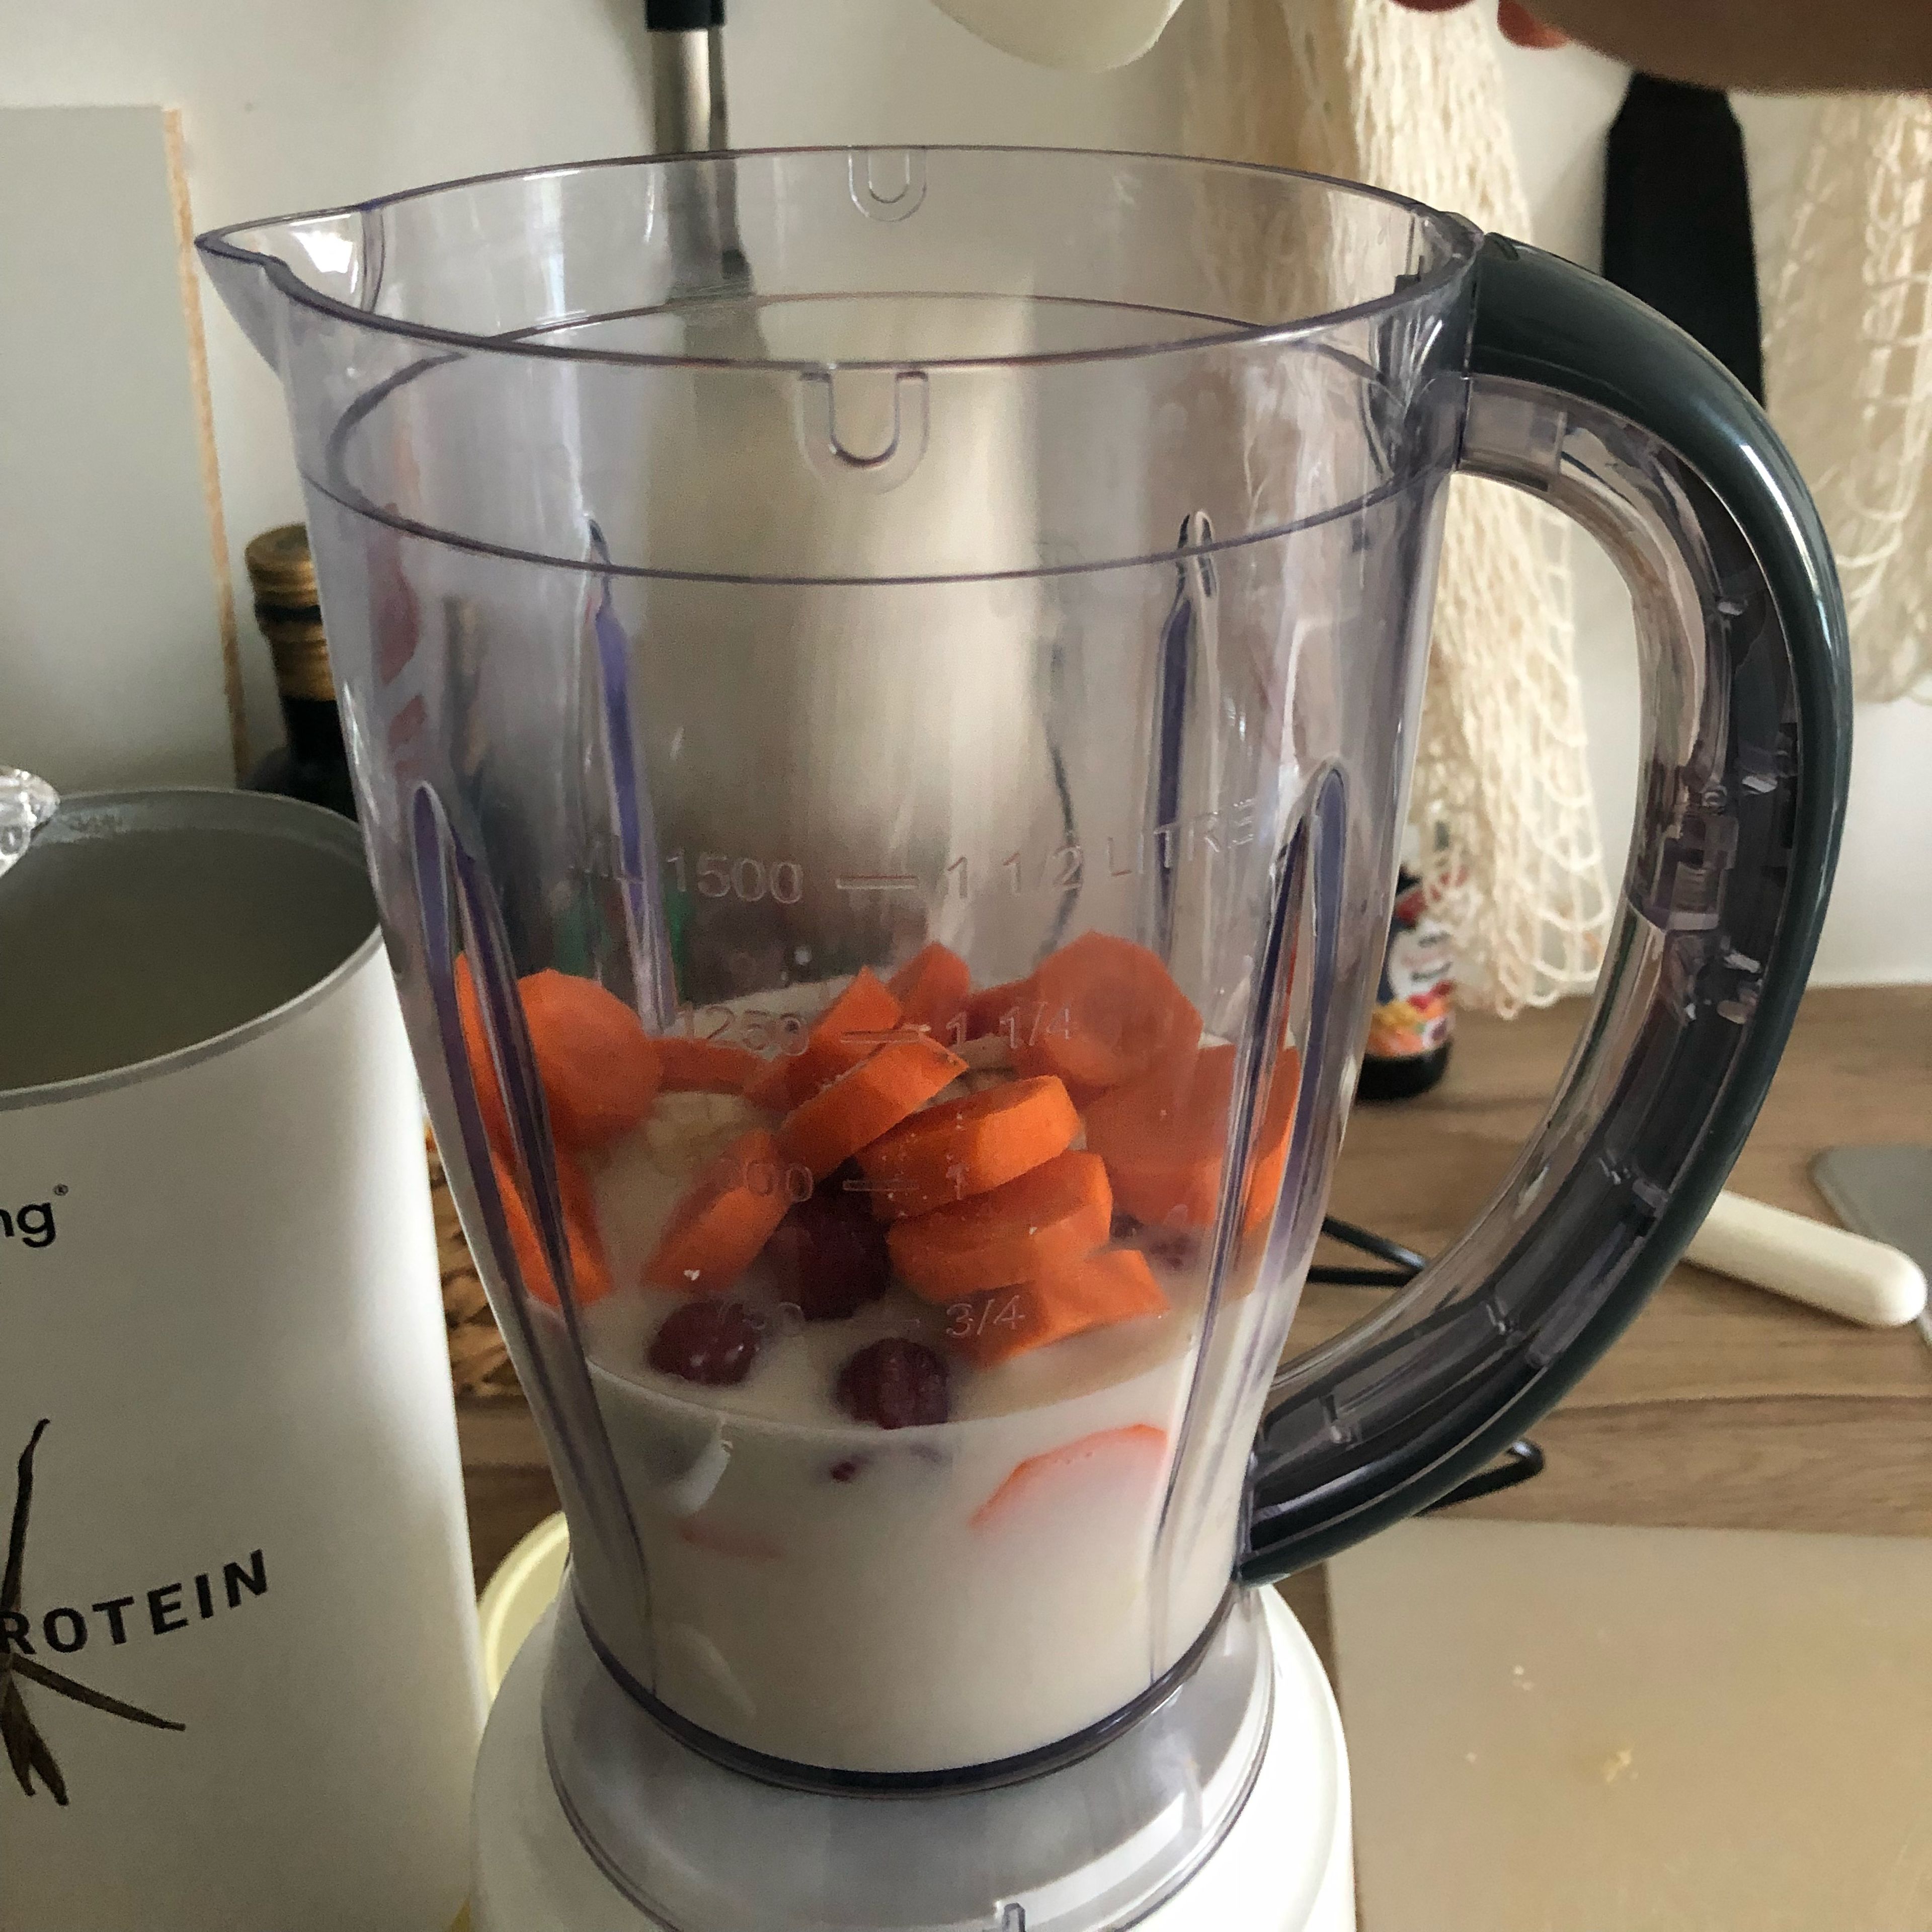 Put the slices and the raspberries in a powerful blender and add a cup of soy milk (250 ml).